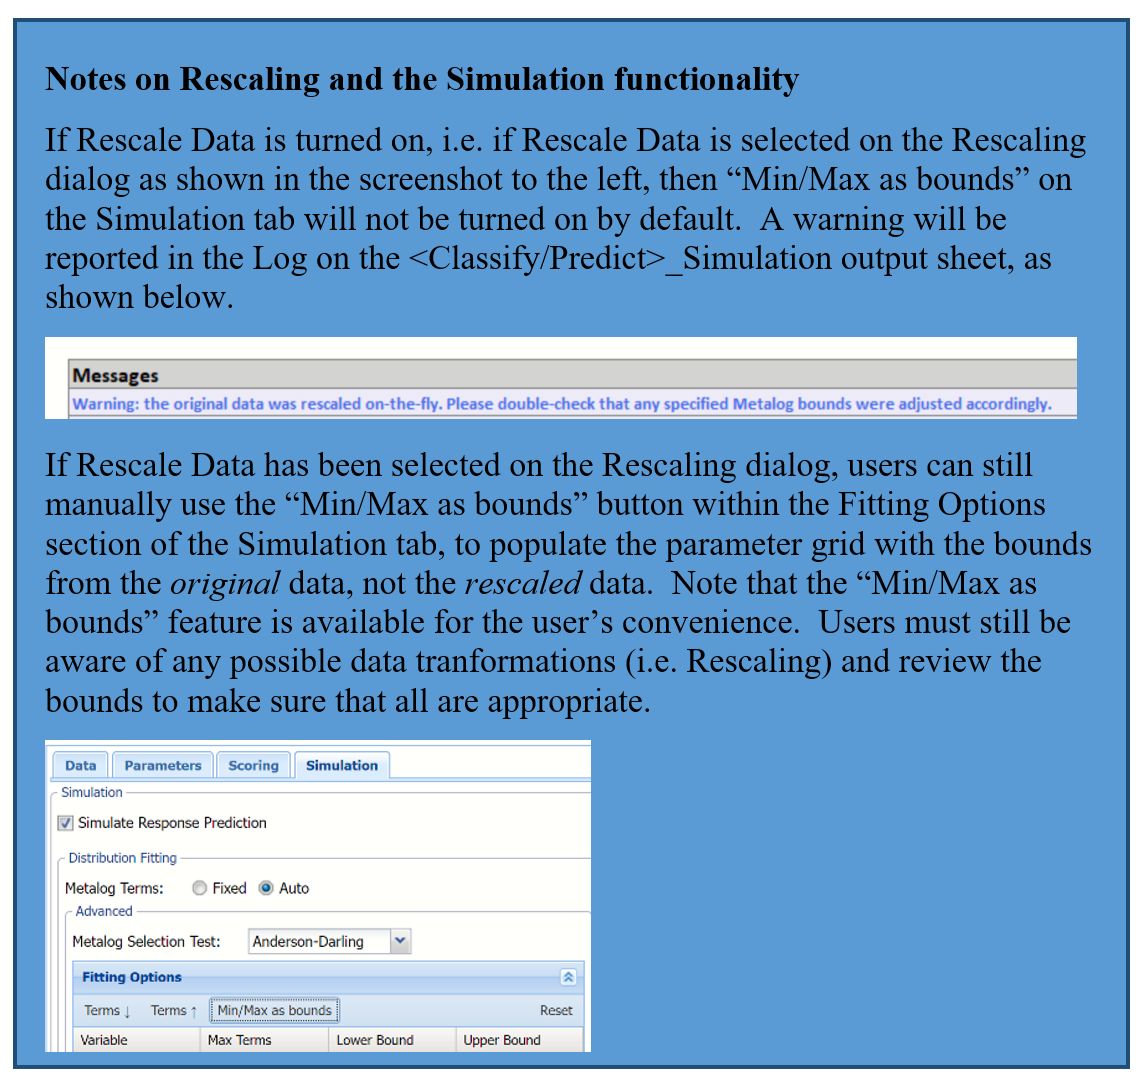 Analytic Solver Data Mining: Notes on Rescaling and the Simulation functionality